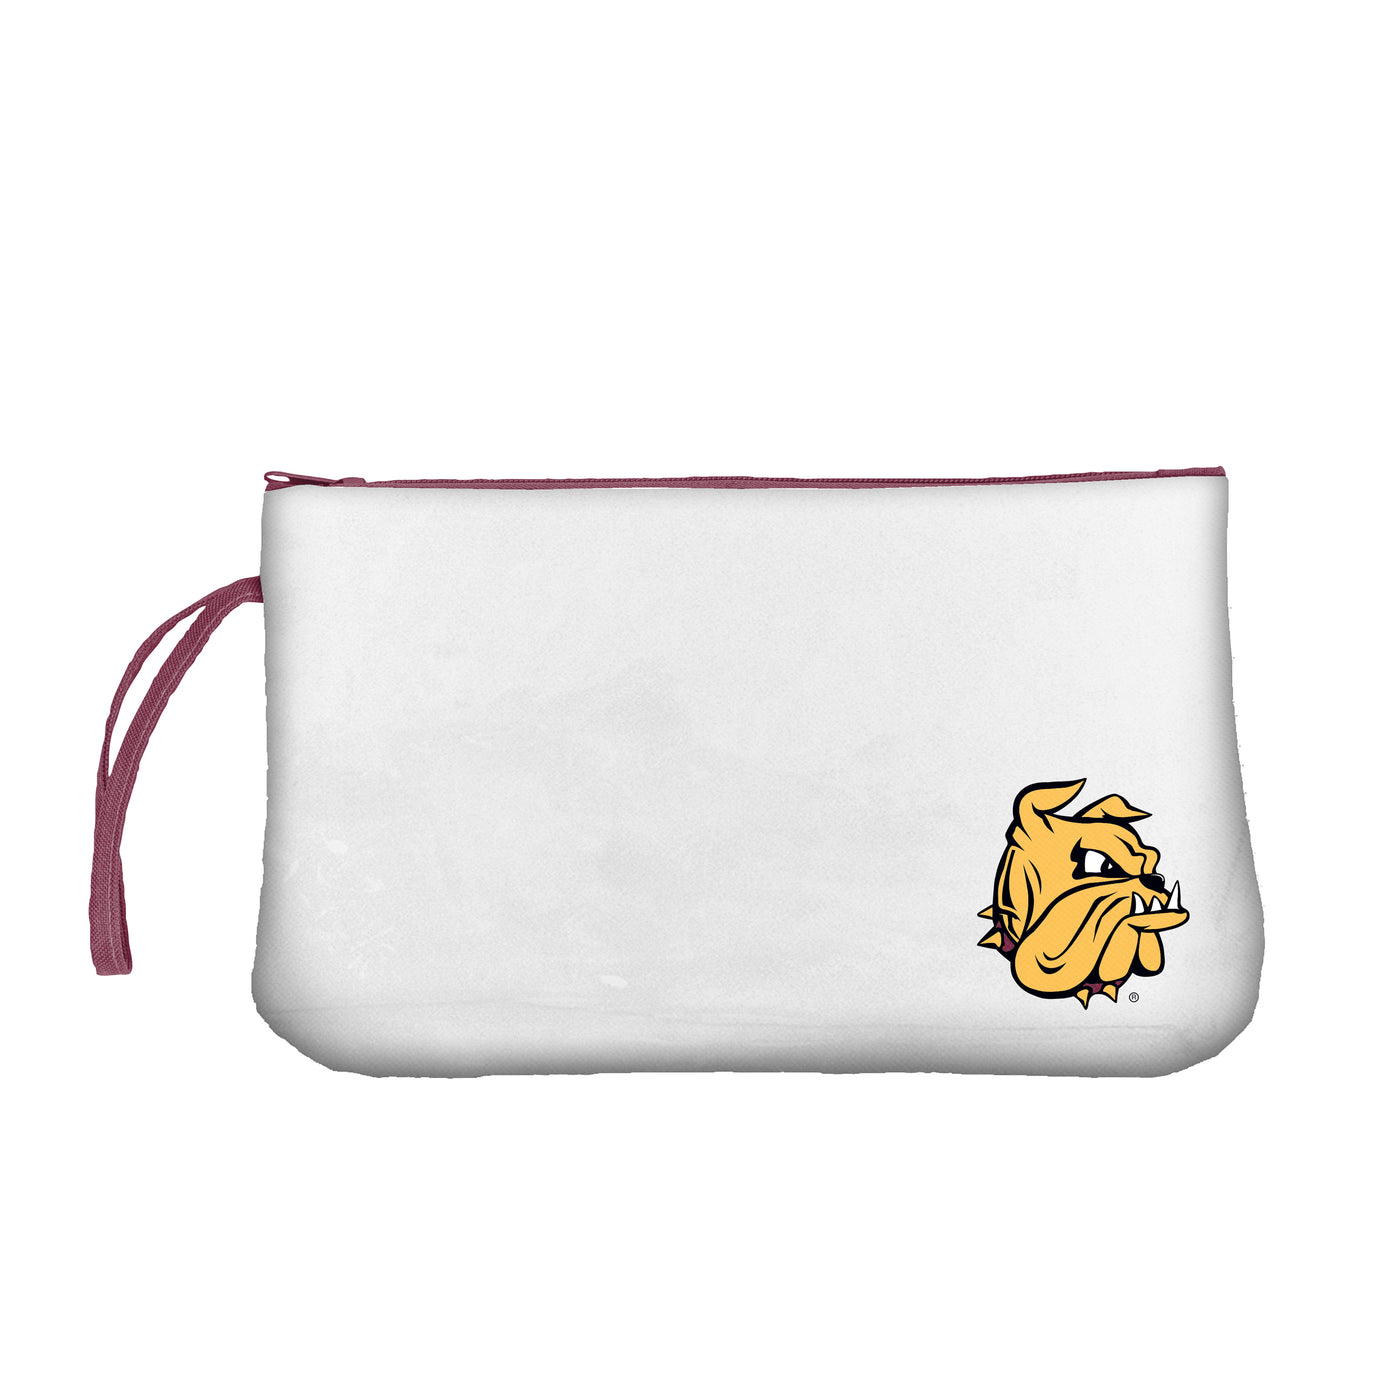 MN Duluth Clear Wristlet